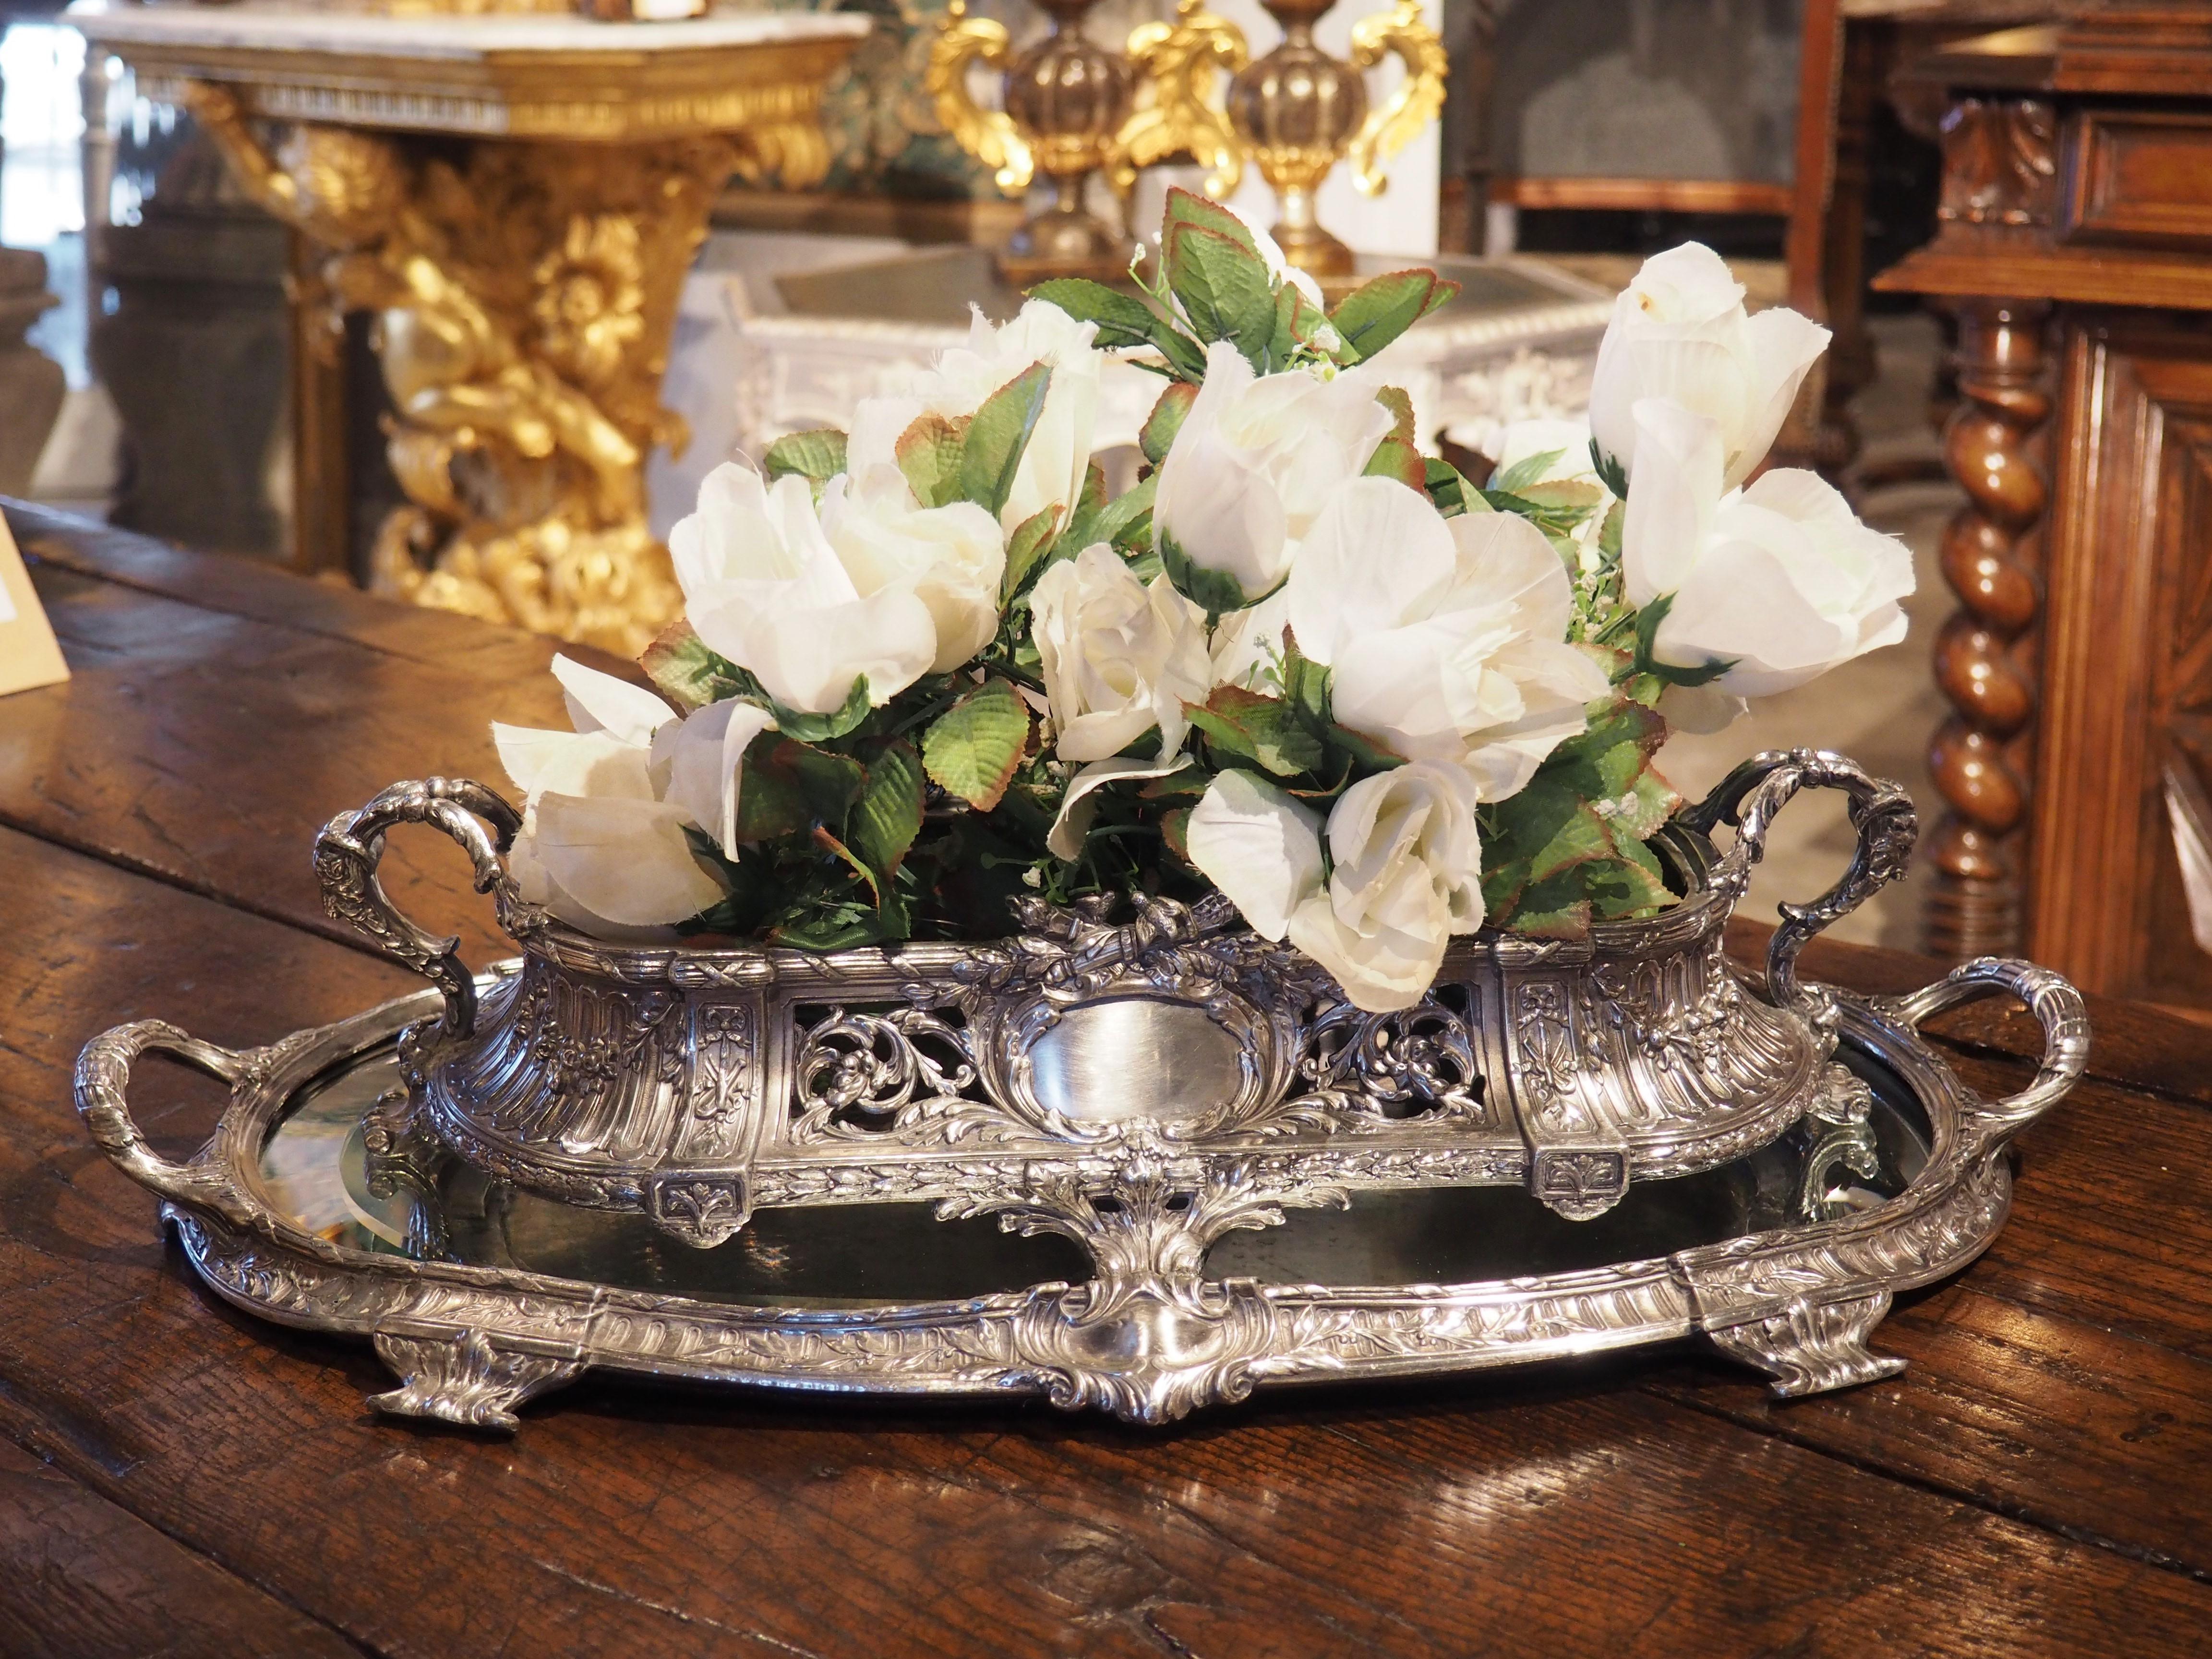 In France, a mirrored plateau that is displayed on a table is known as a surtout de table. The mirrors ranged in size from a foot long to well over 20 feet; other materials varied as well, although gilding, silvering, and exotic metals were quite